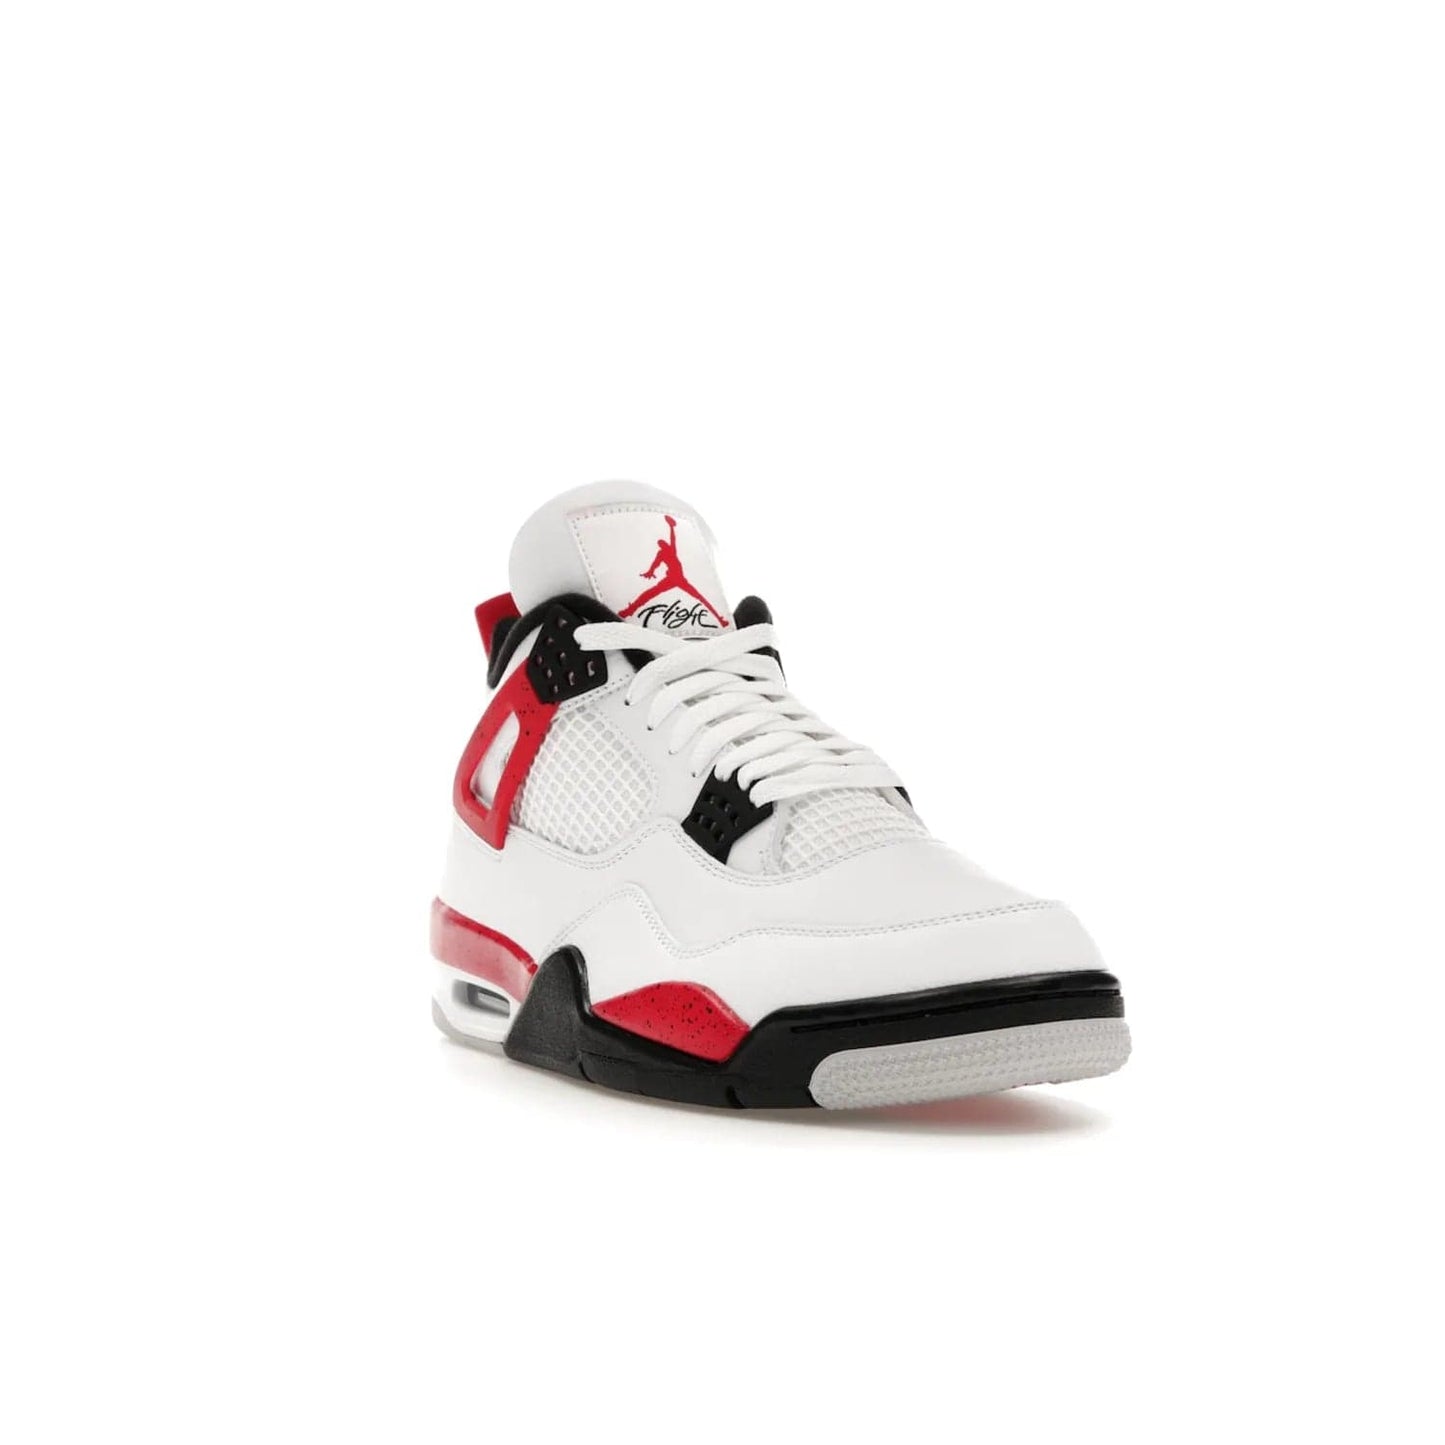 Jordan 4 Retro Red Cement - Image 7 - Only at www.BallersClubKickz.com - Iconic Jordan silhouette with a unique twist. White premium leather uppers with fire red and black detailing. Black, white, and fire red midsole with mesh detailing and Jumpman logo. Jordan 4 Retro Red Cement released with premium price.